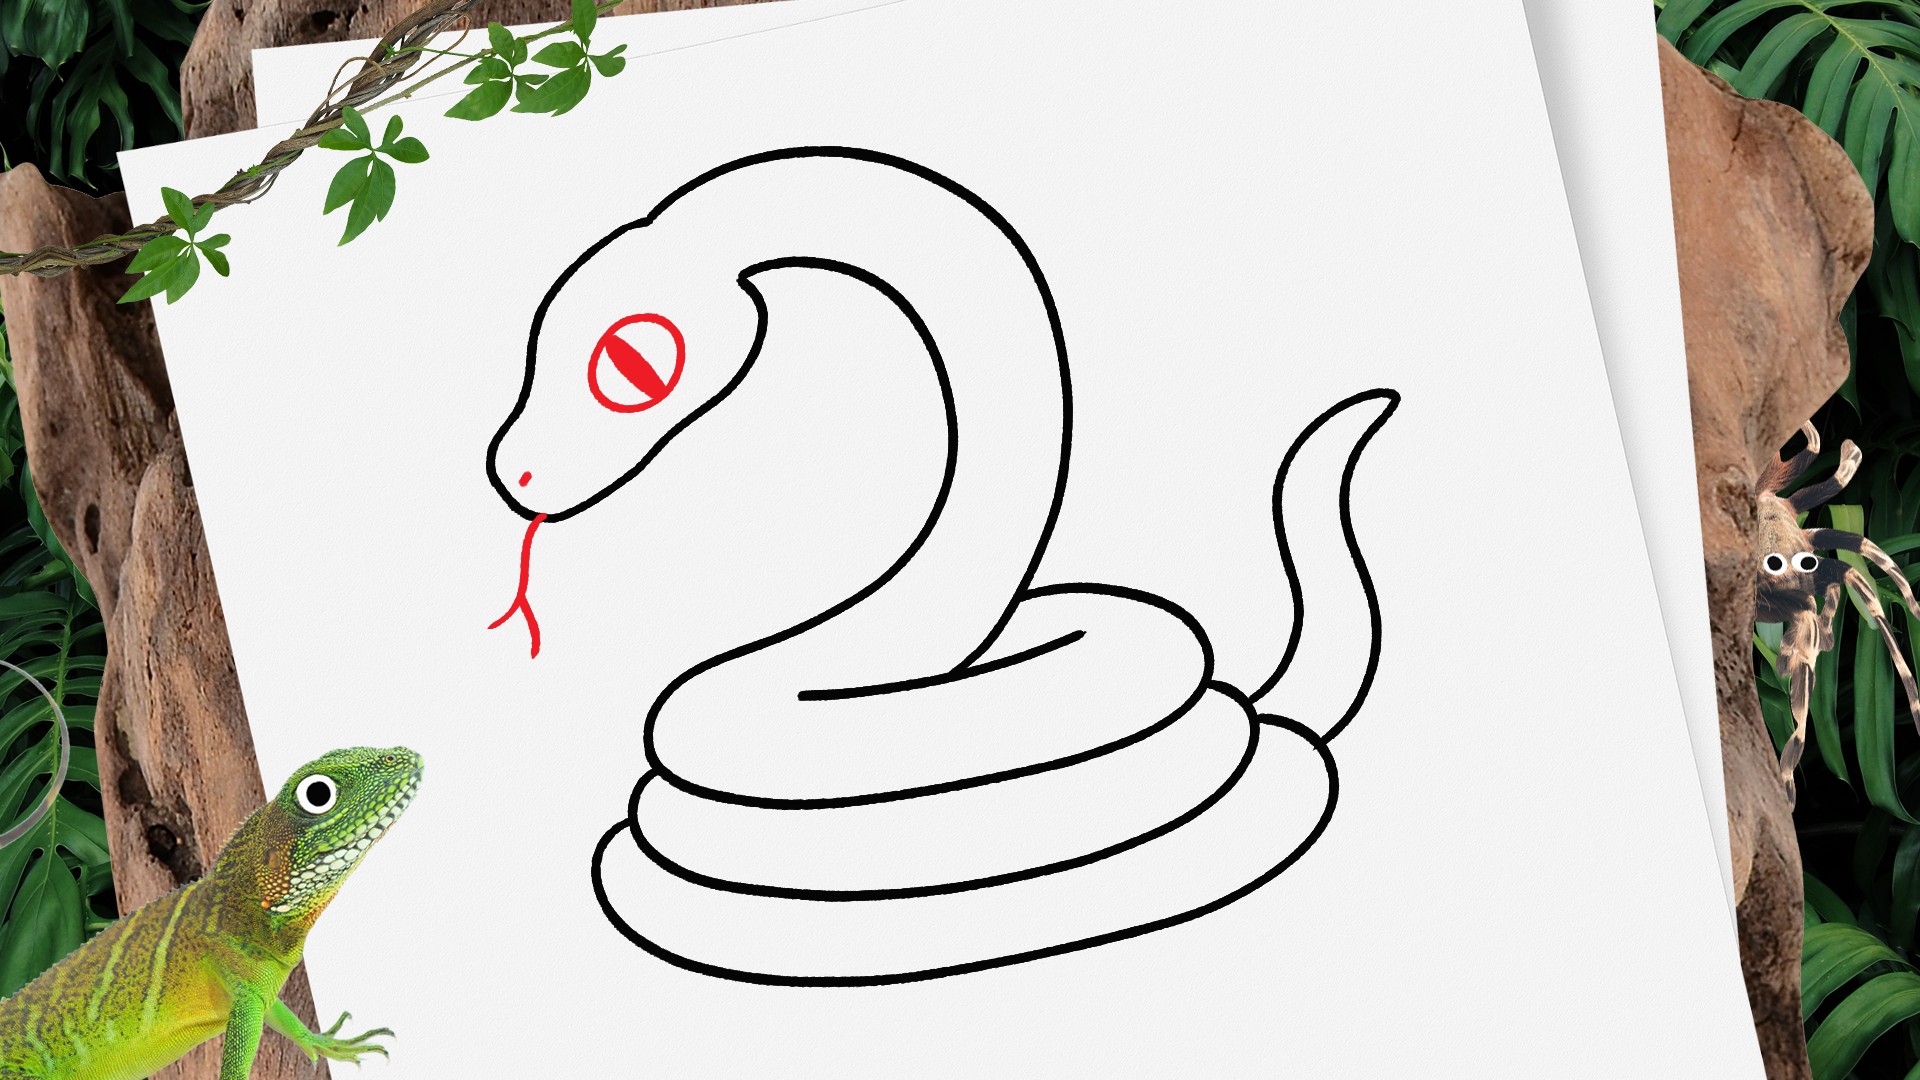 How to draw Snake step by step easy drawing for kids | Welcome to RGBpencil